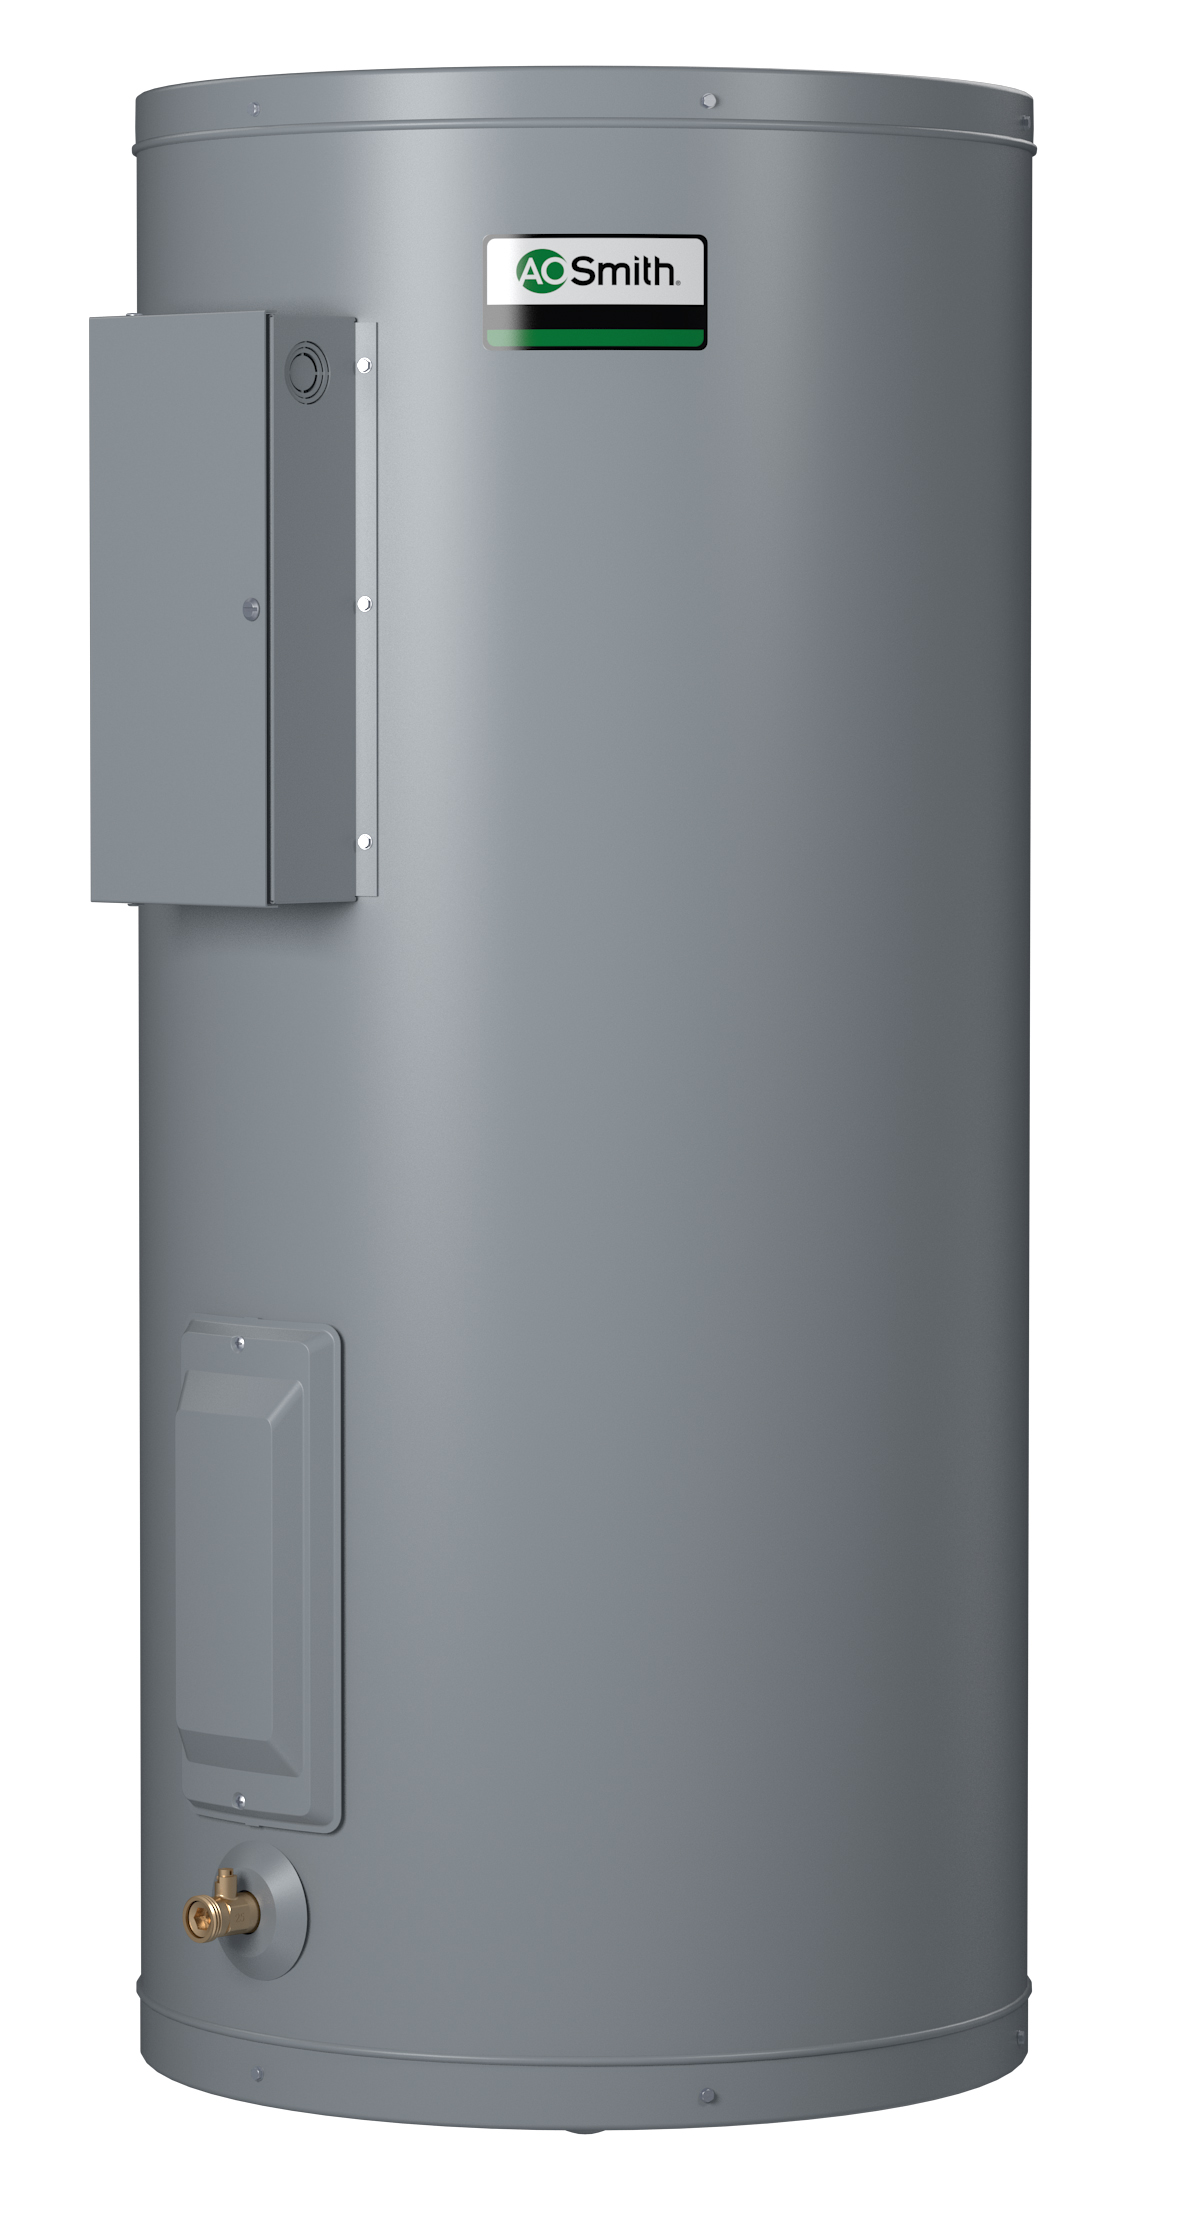 AO SMITH DEN-30D: 40 GALLONS, 5.0KW, 208 VOLT, 3 PHASE, (2-5000 WATT ELEMENTS, NON-SIMULTANEOUS WIRING), DURA-POWER, LIGHT DUTY COMMERCIAL ELECTRIC WATER HEATER